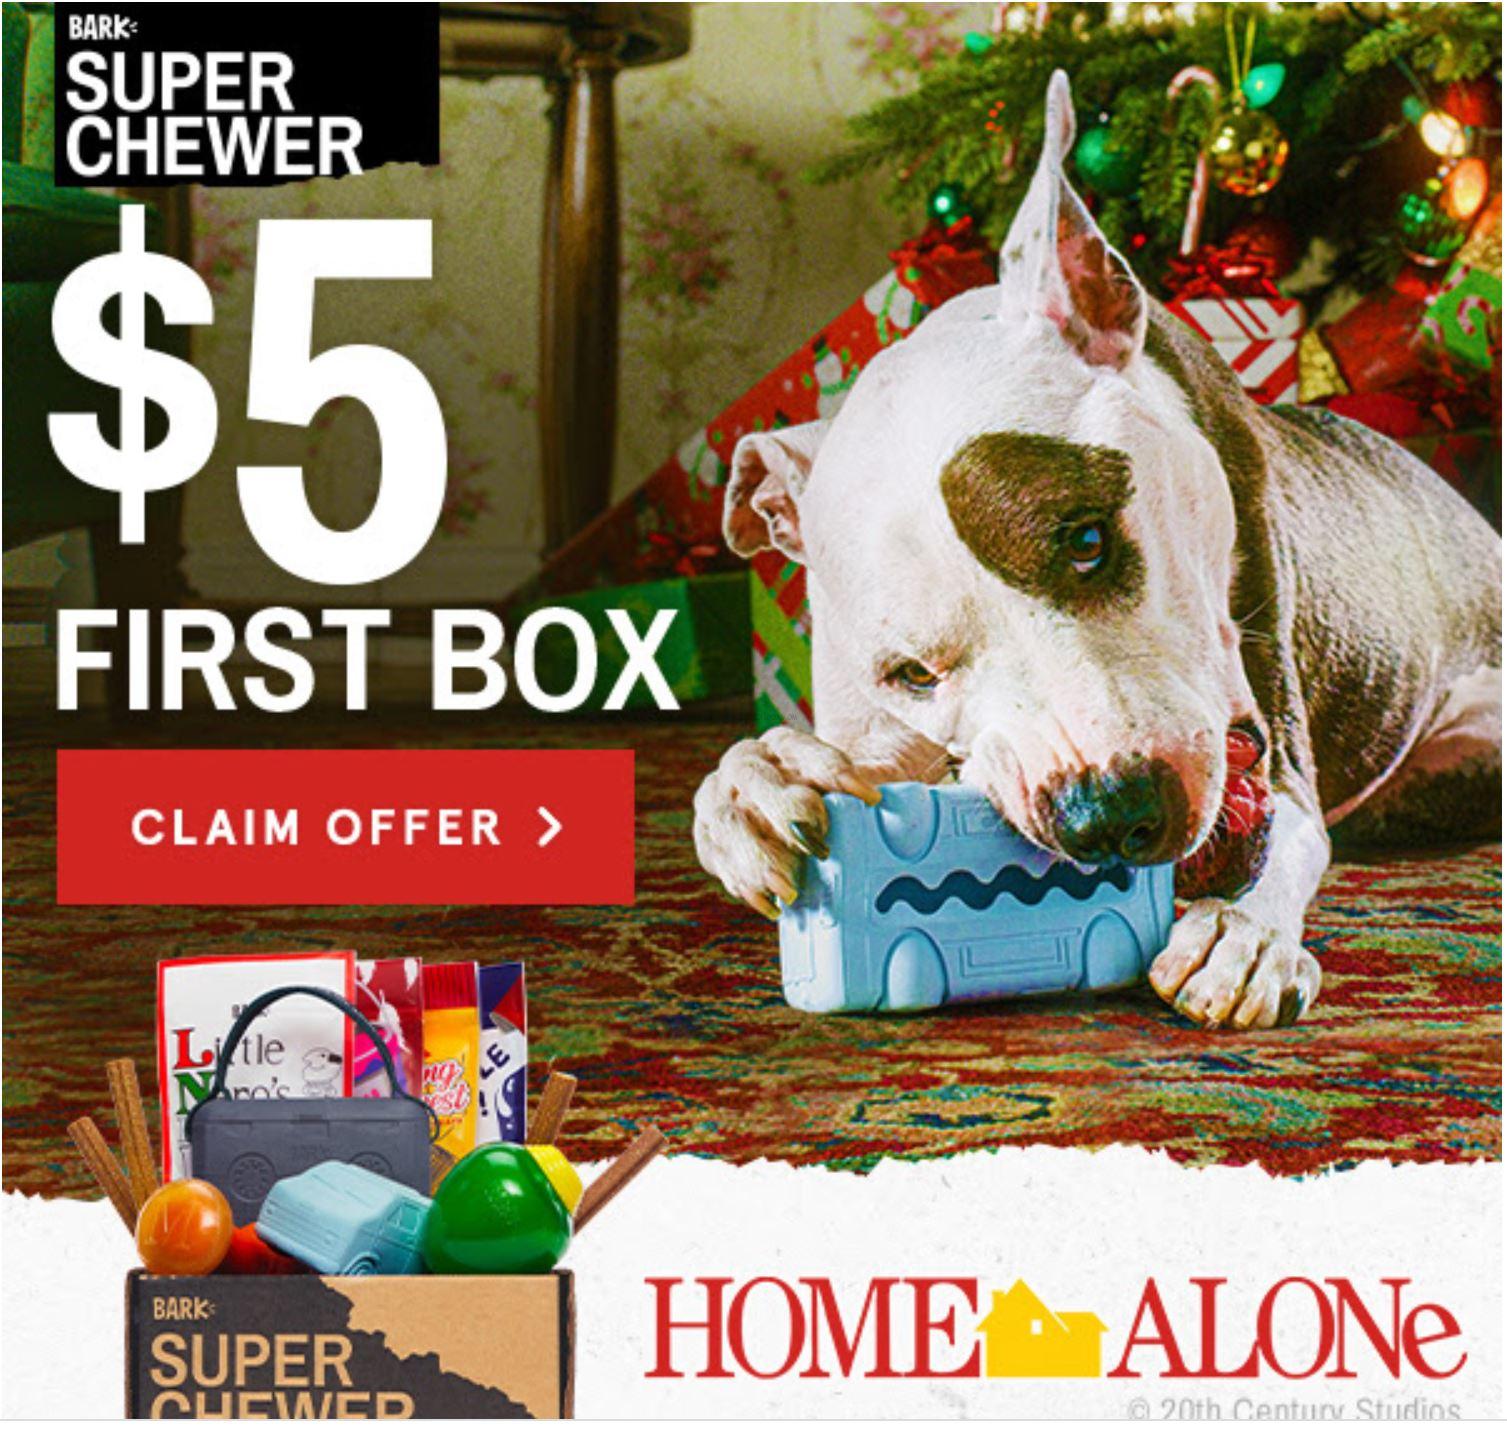 Super Chewer Black Friday 2020 Coupon